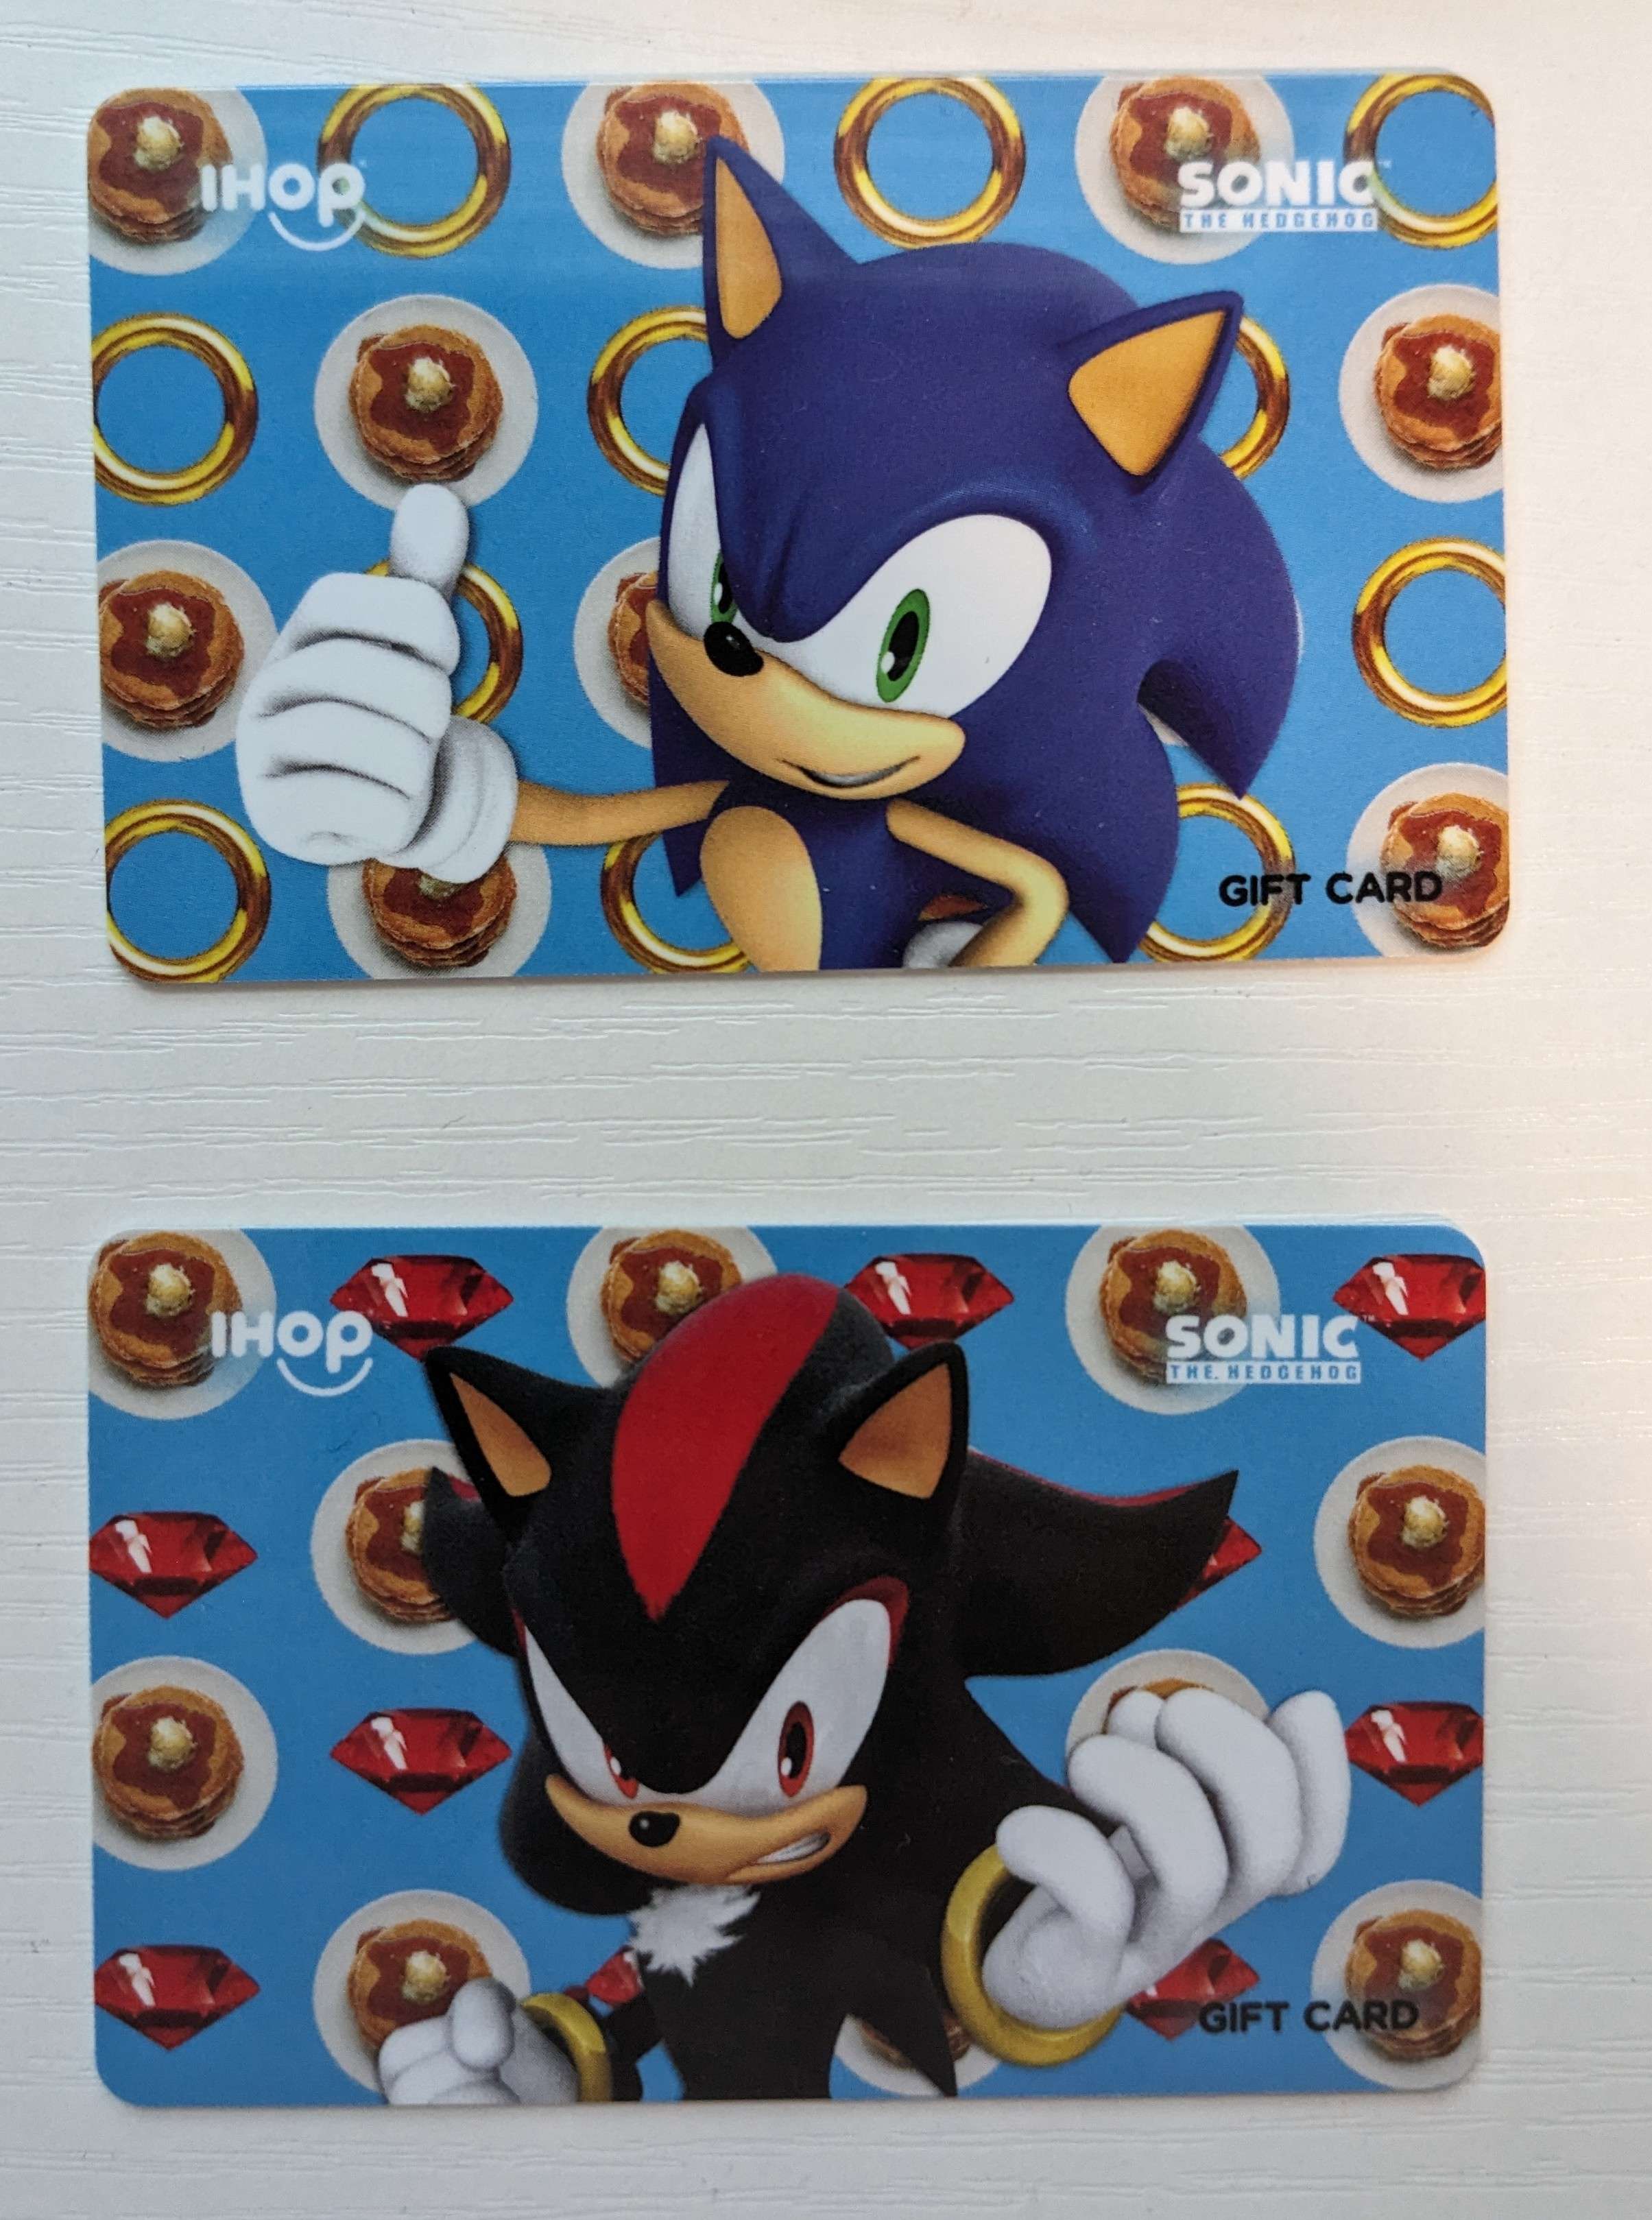 ihop sonic gift cards